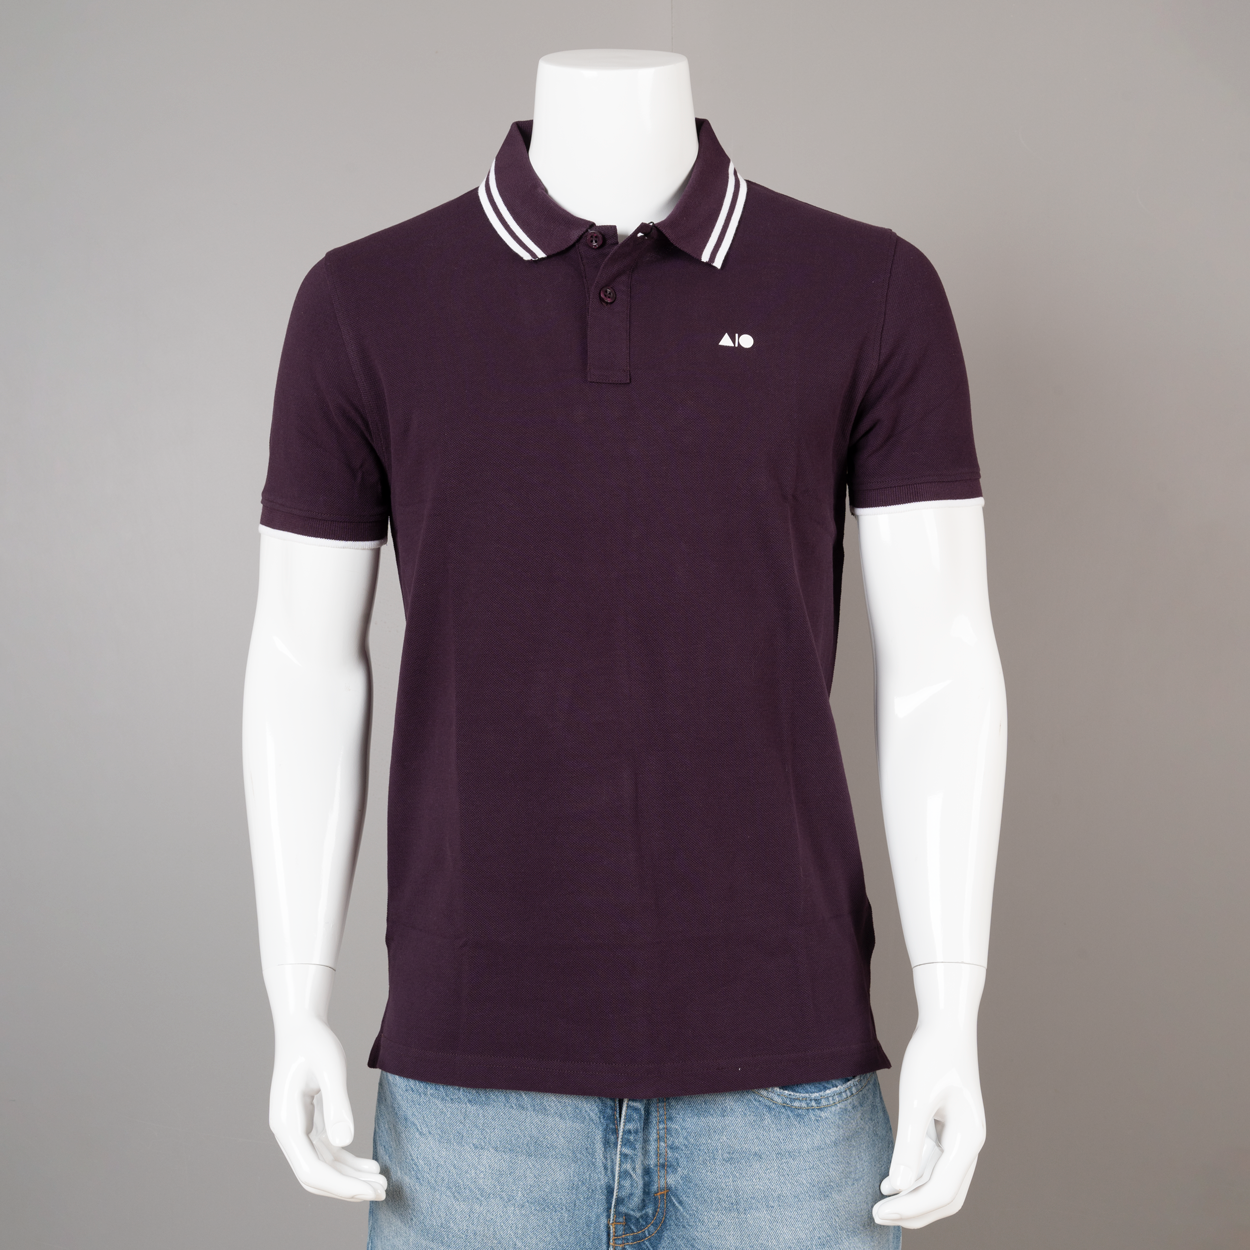 Mens Tipping Polo Shirt (Wine)